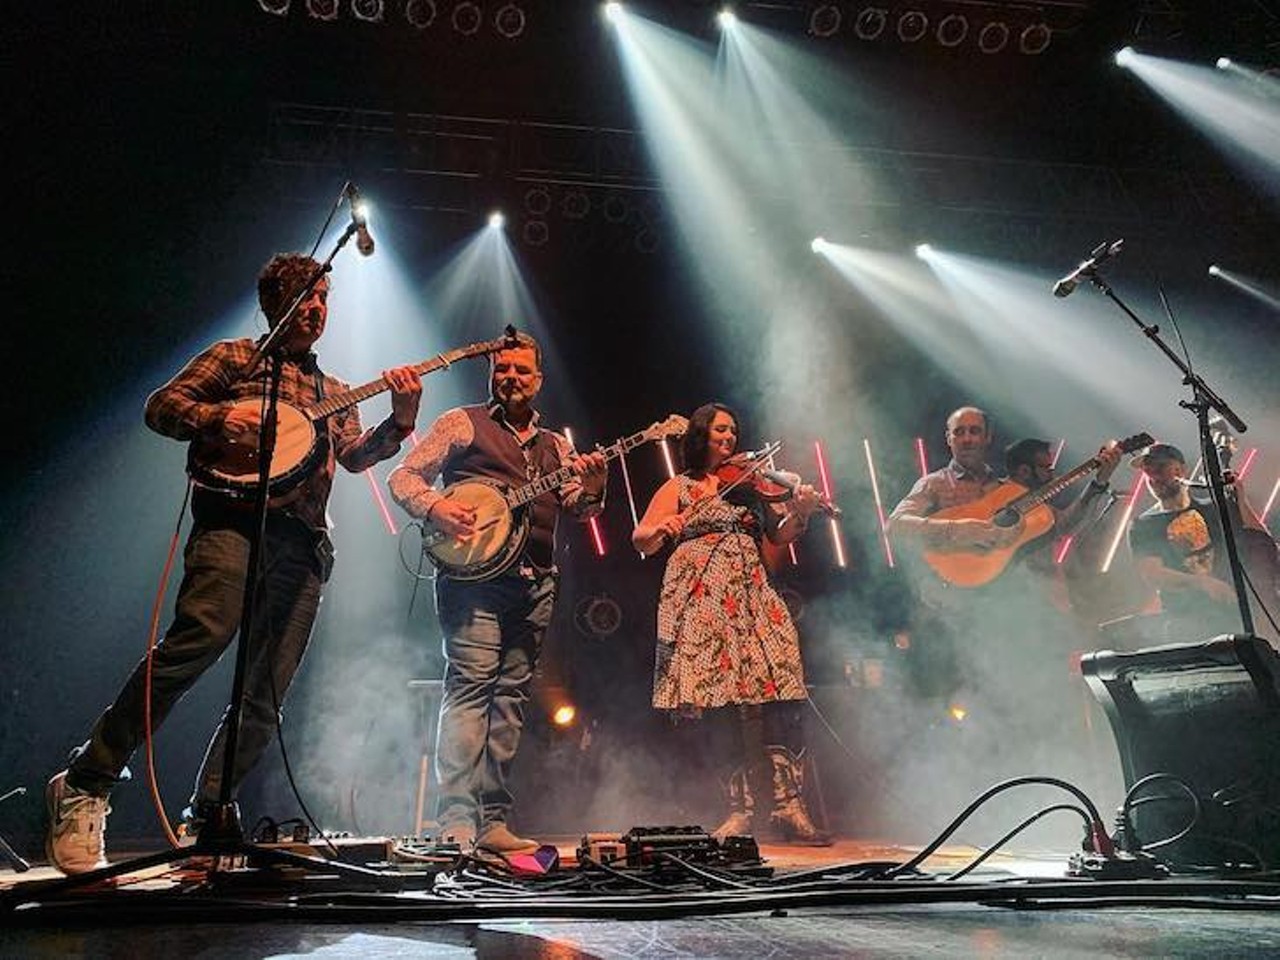 Wednesday, Feb. 5Yonder Mountain String Band at the Plaza Live